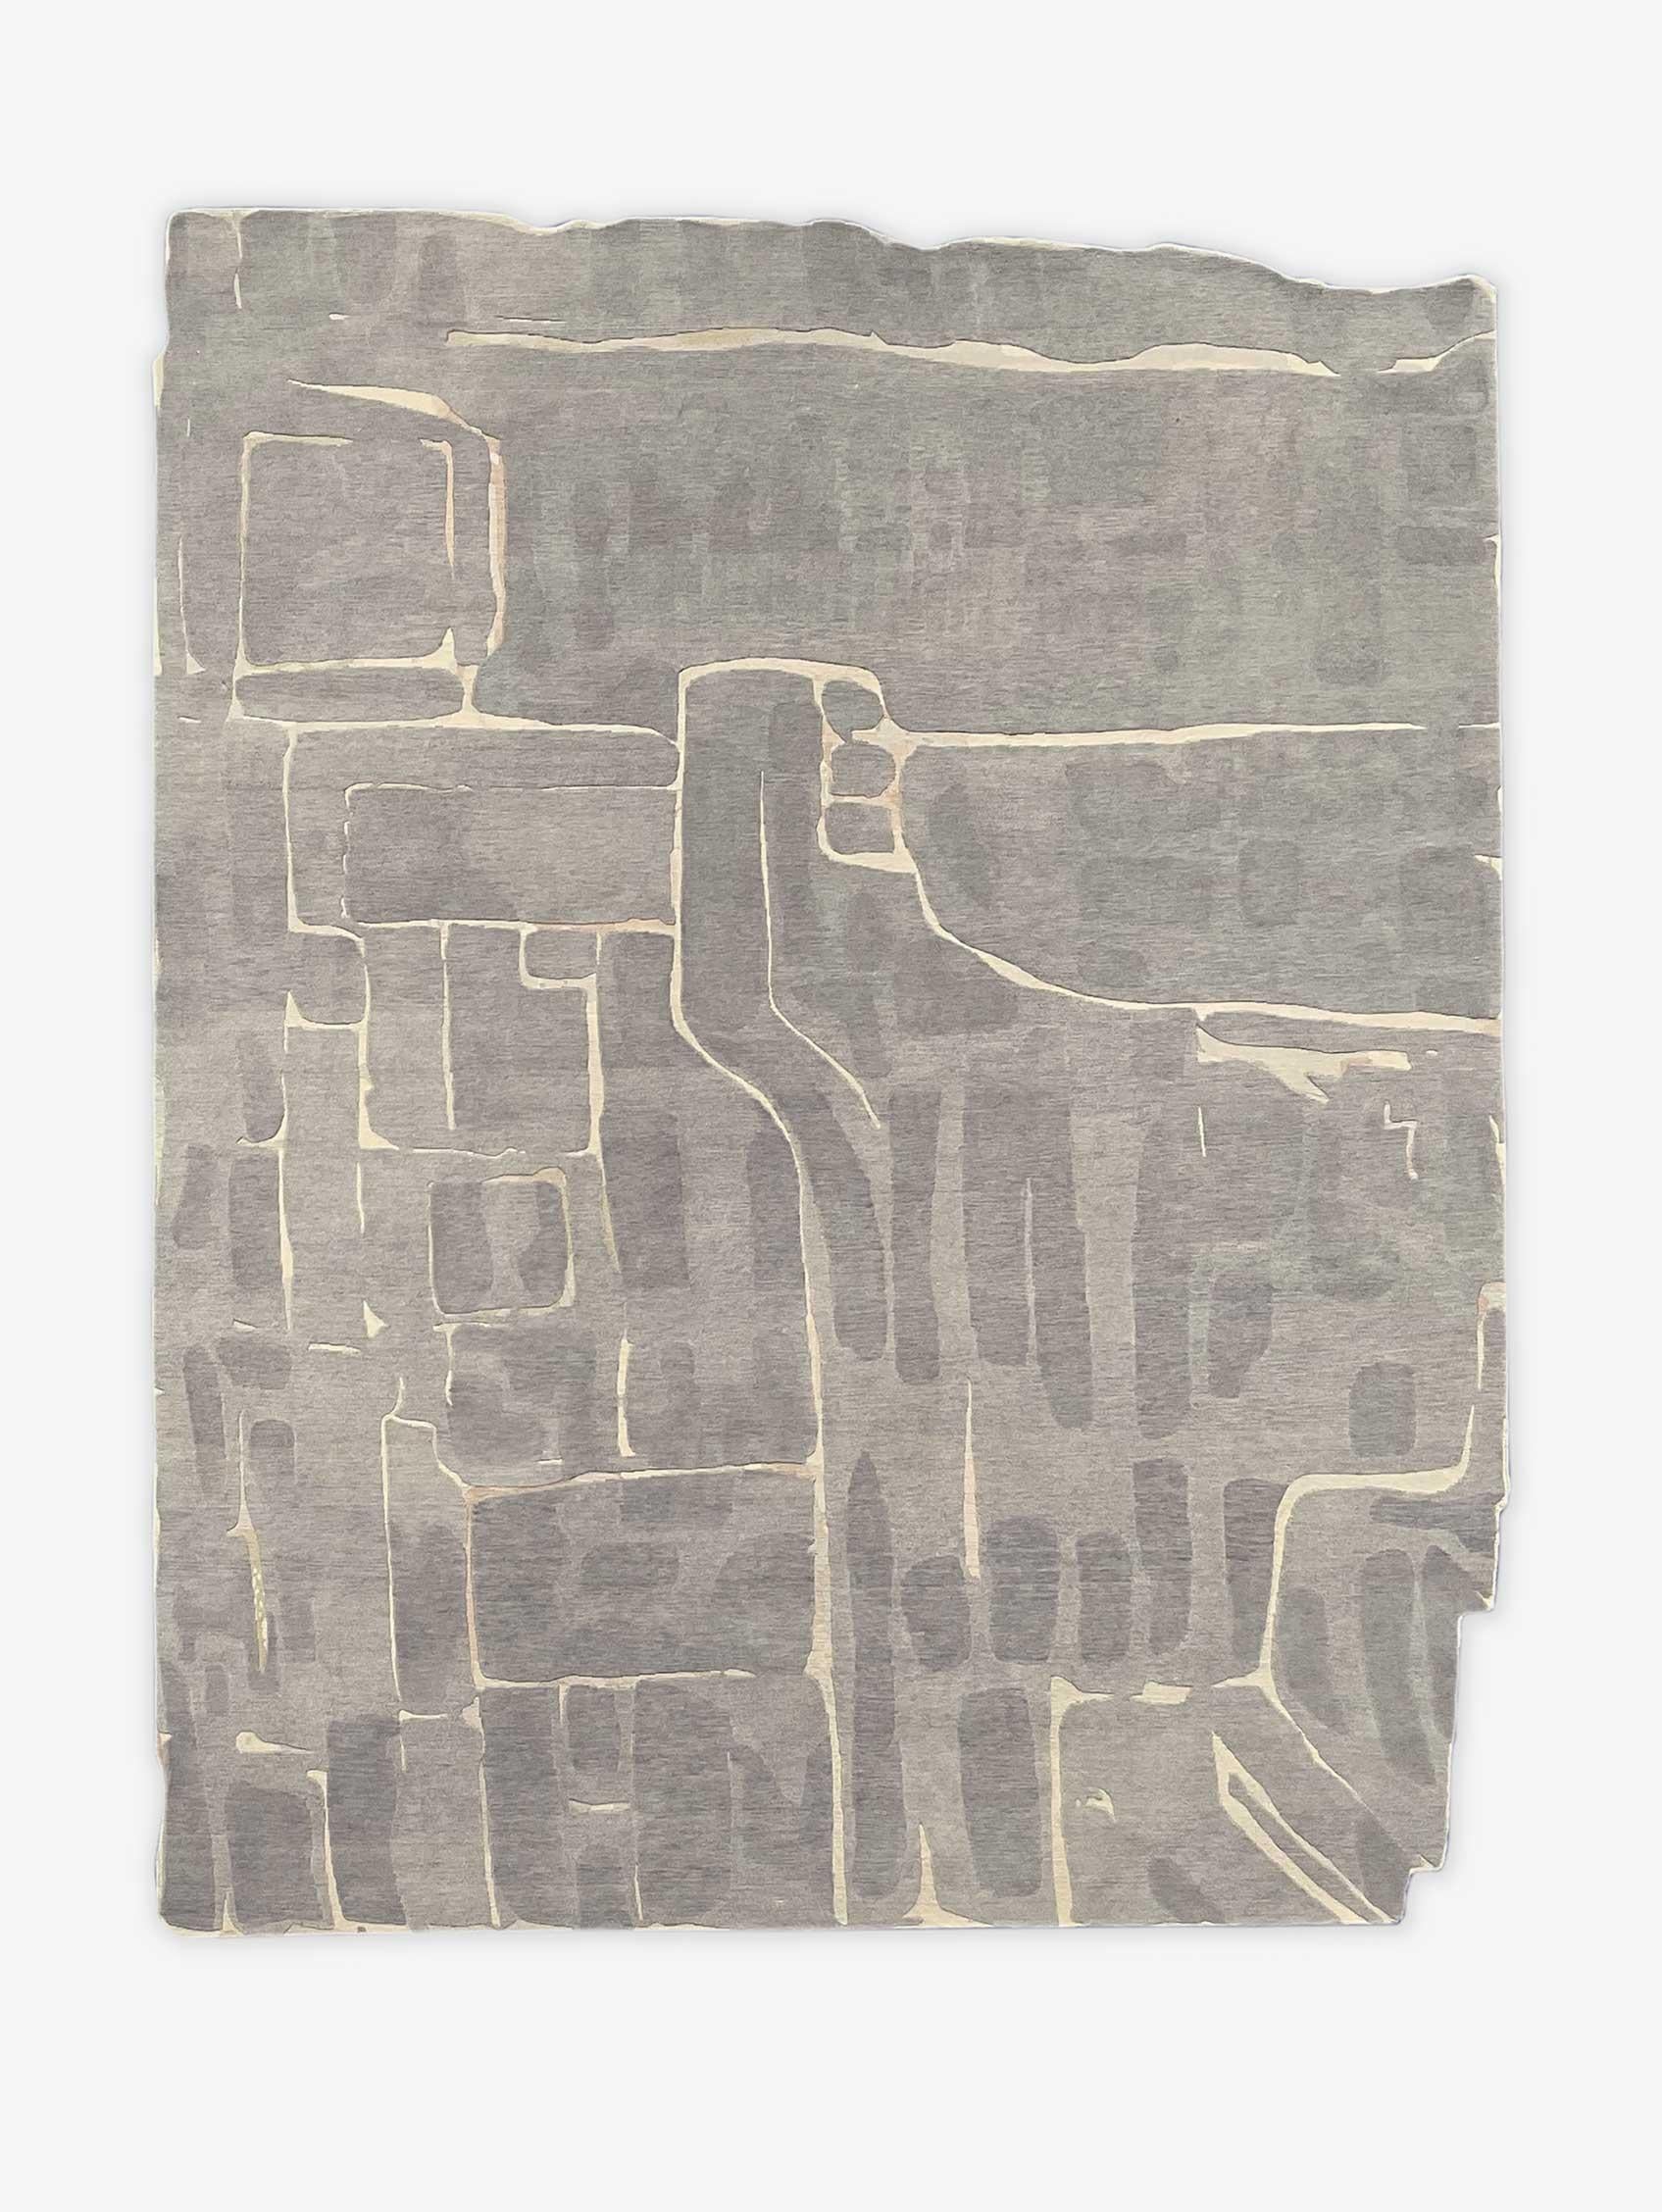 Portico Greyscale Hand-Knotted Rug by Eskayel.
Dimensions: D 8' x H 10'.
Pile Height: 4 mm pile, 3mm loop.
Materials: New Zealand wool.

Eskayel hand-knotted rugs are woven to order and can be customized in various sizes, colors, materials, and